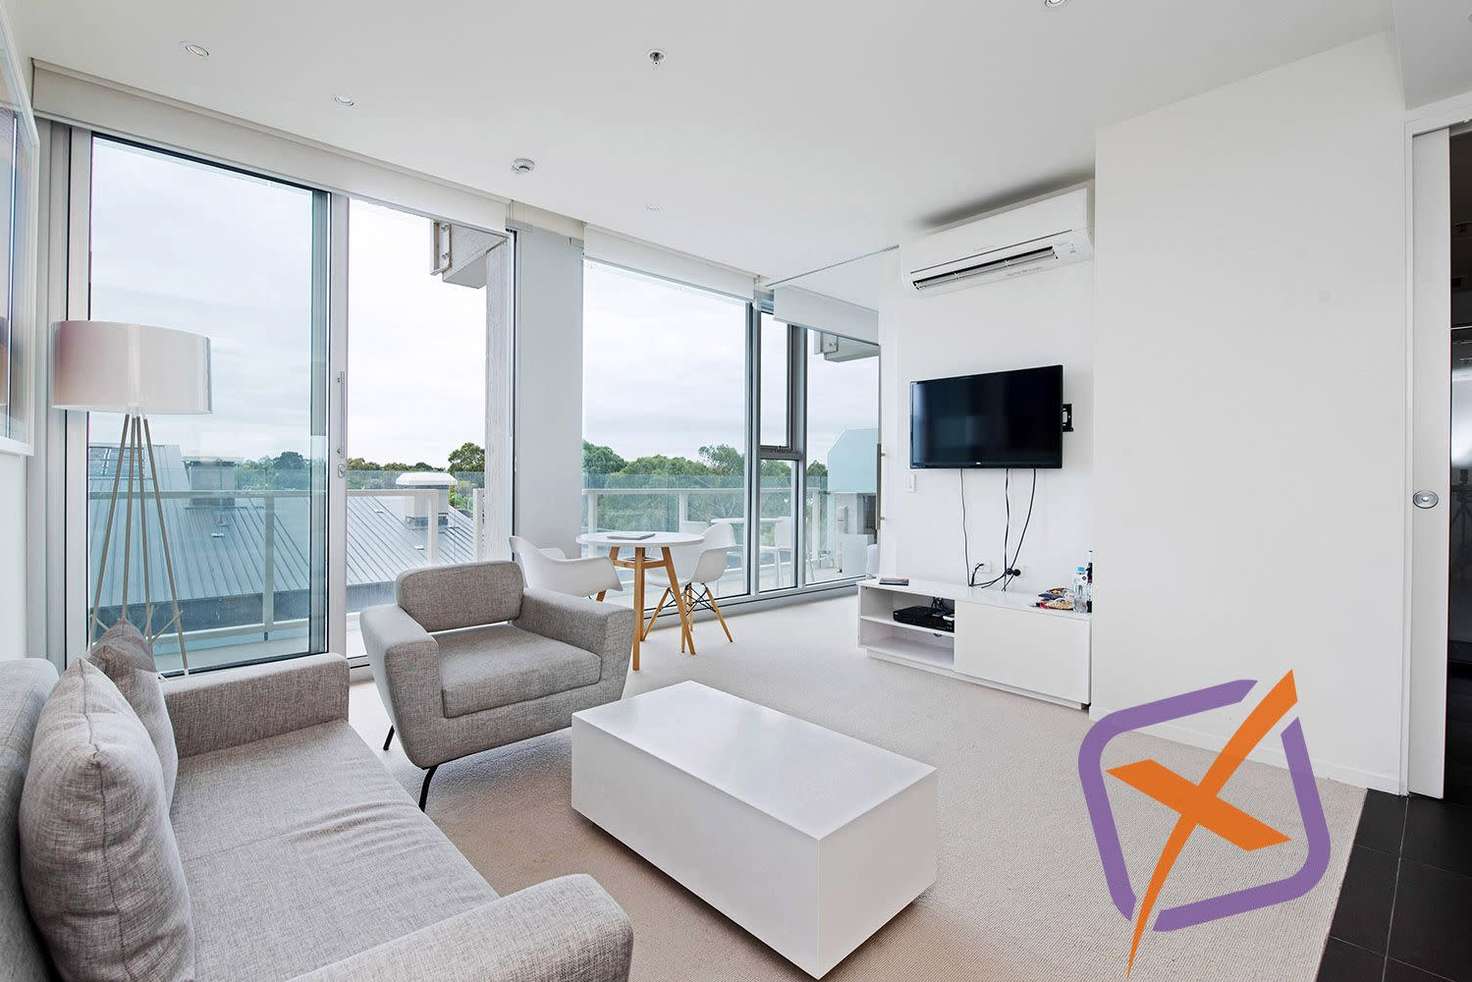 Main view of Homely apartment listing, 327/33 Warwick Street, Walkerville SA 5081